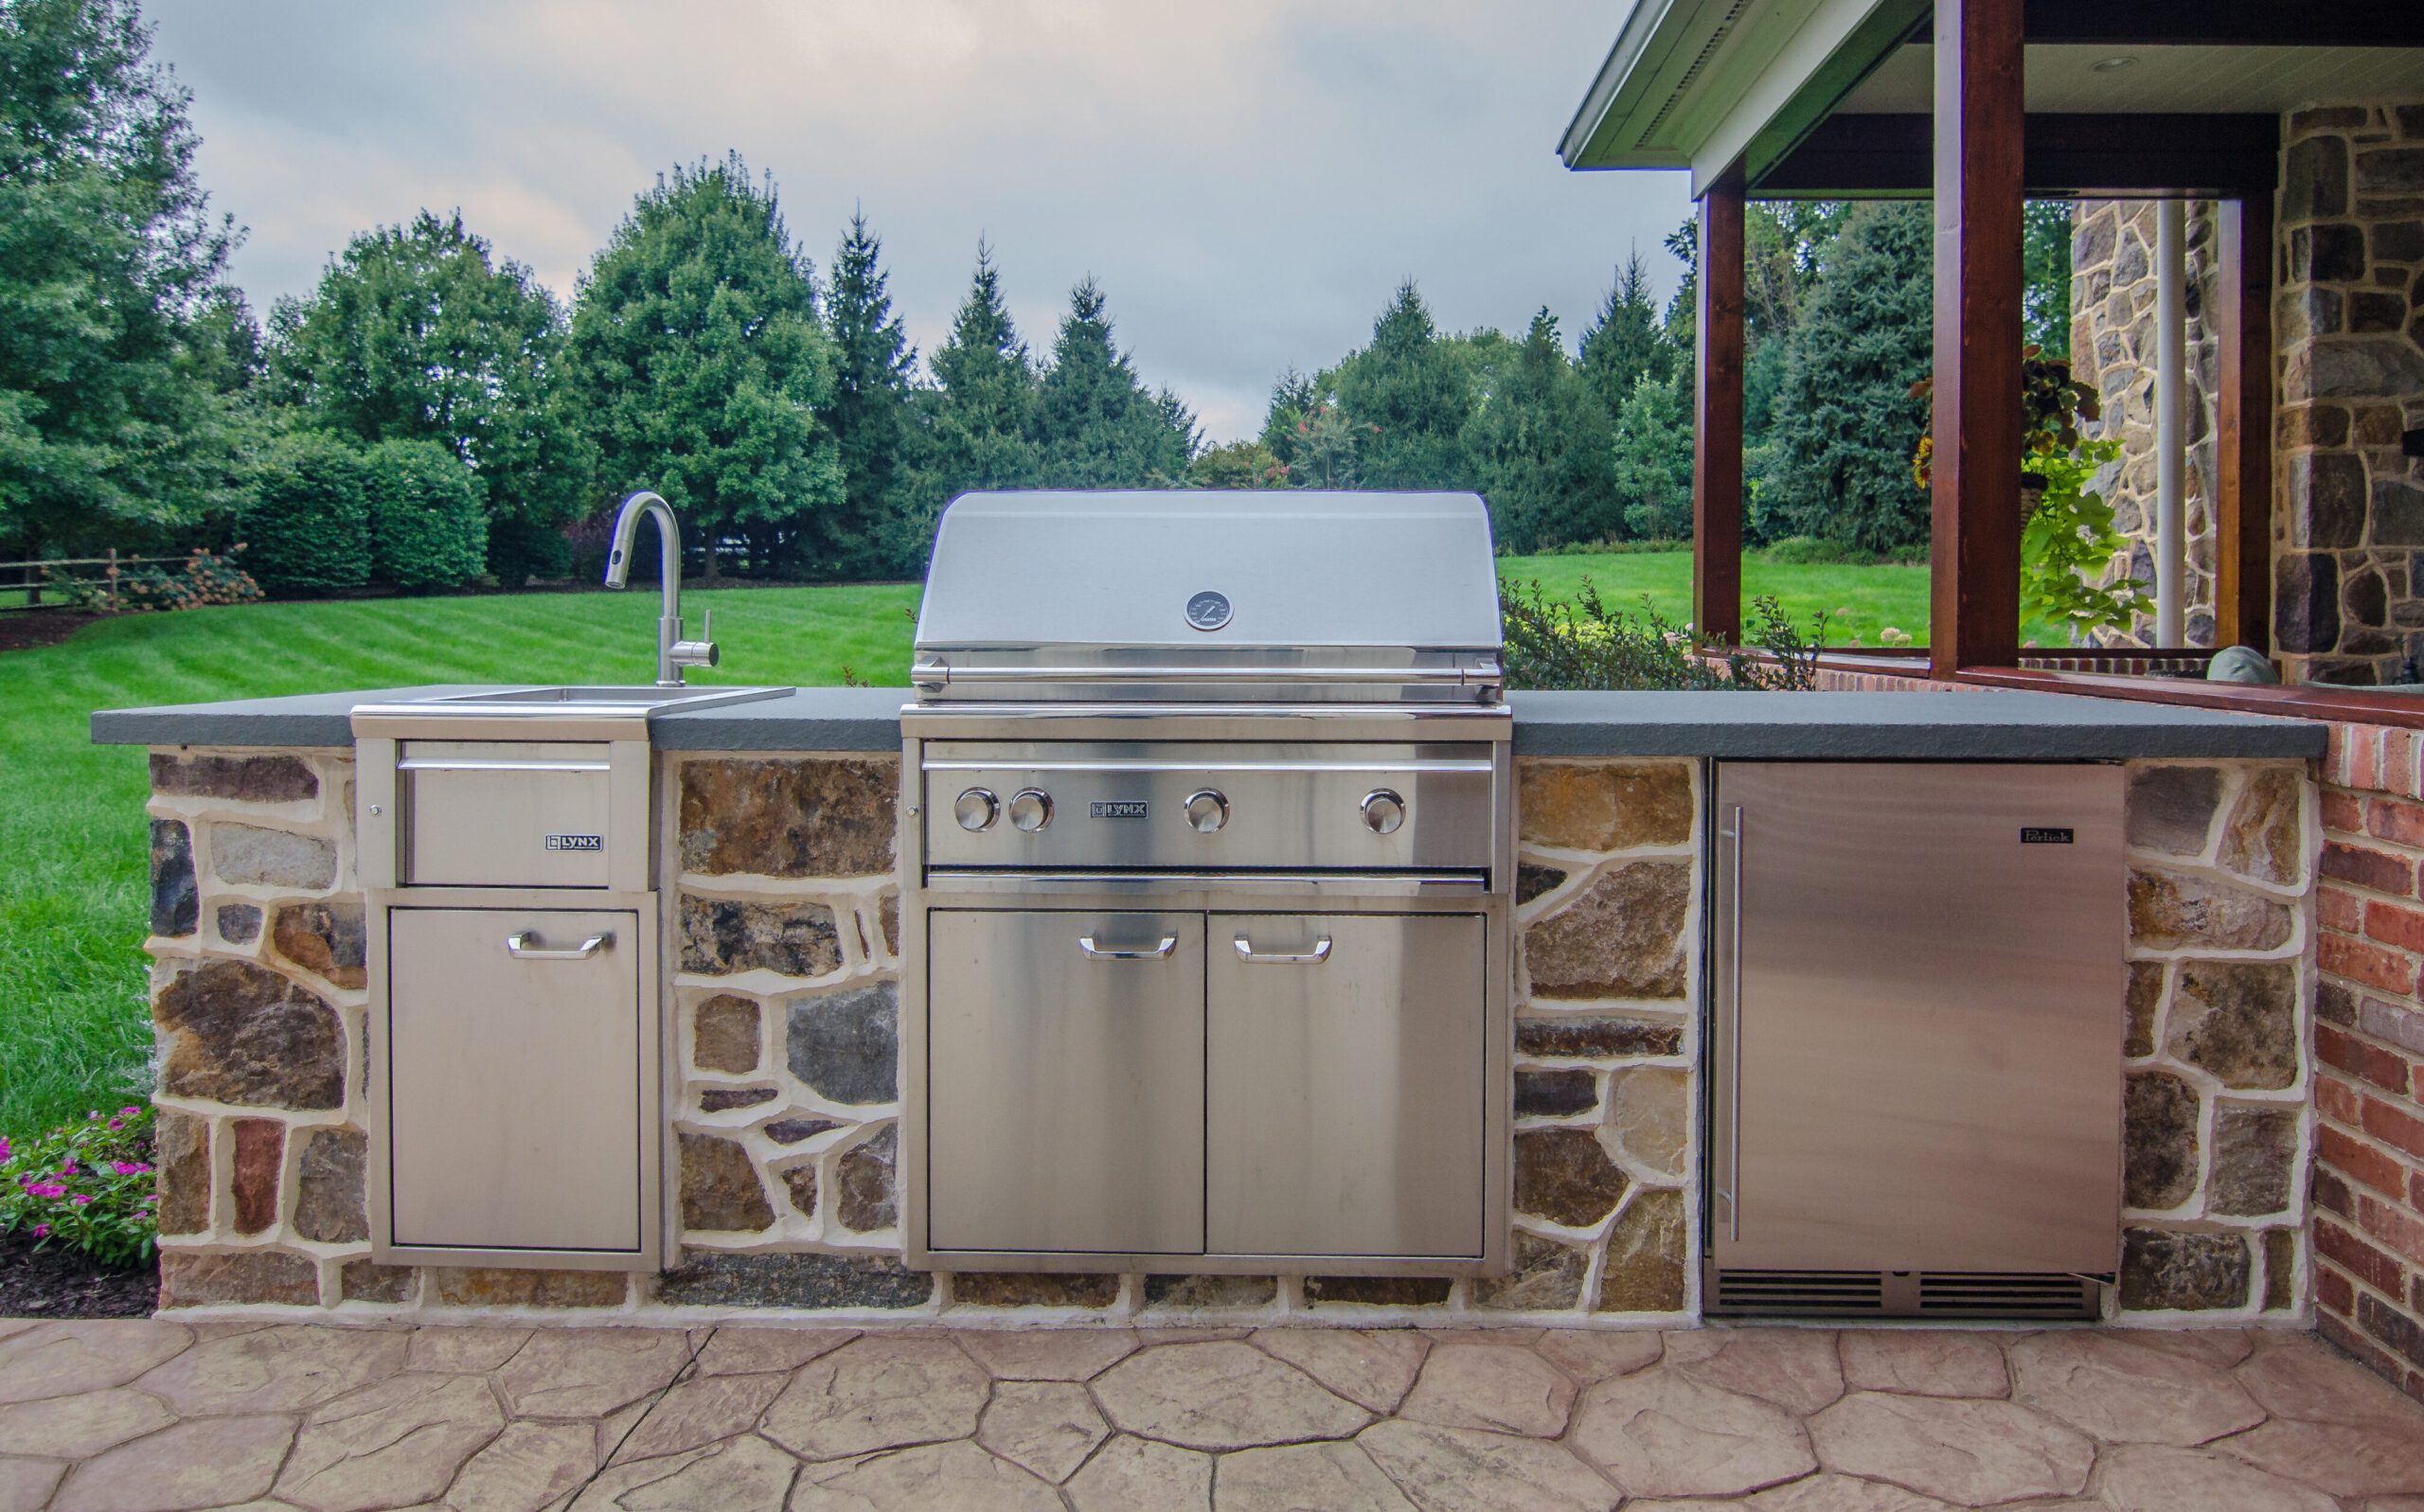 An outdoor kitchen features a sink, built-in grill, and refrigerator.